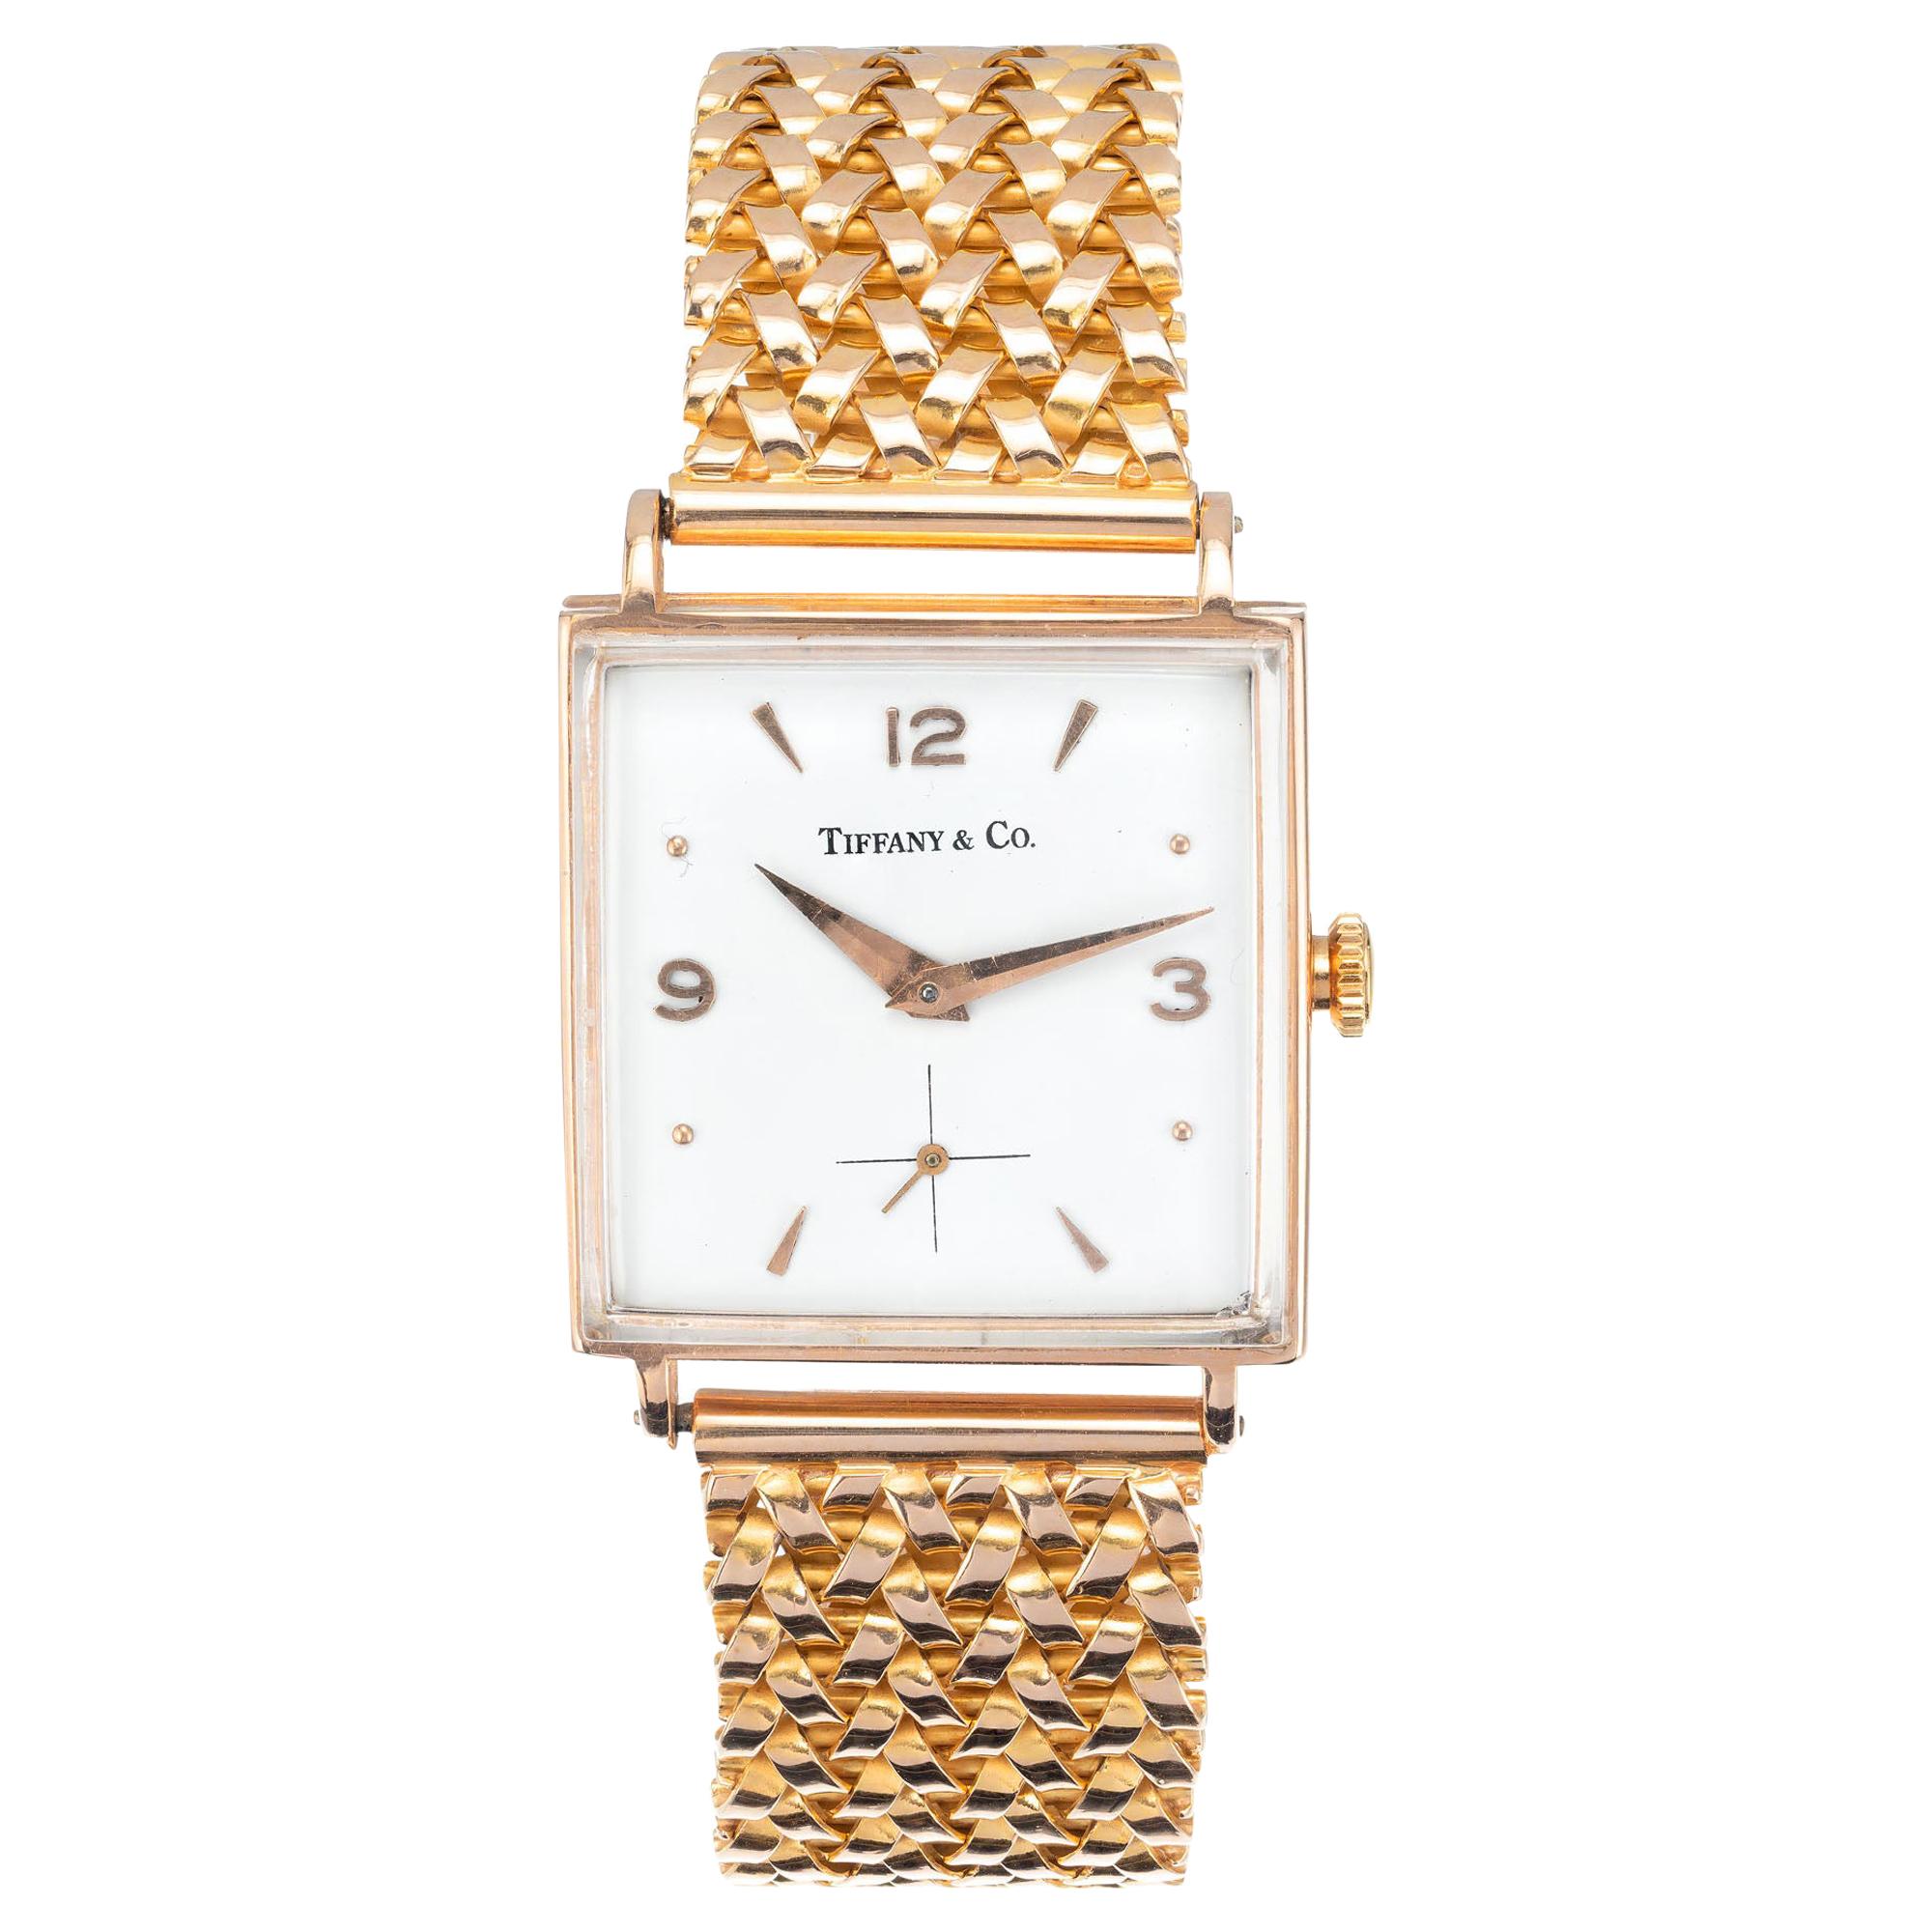 Tiffany & Co. Rose Gold Universal Genève Midcentury Wristwatch For Sale